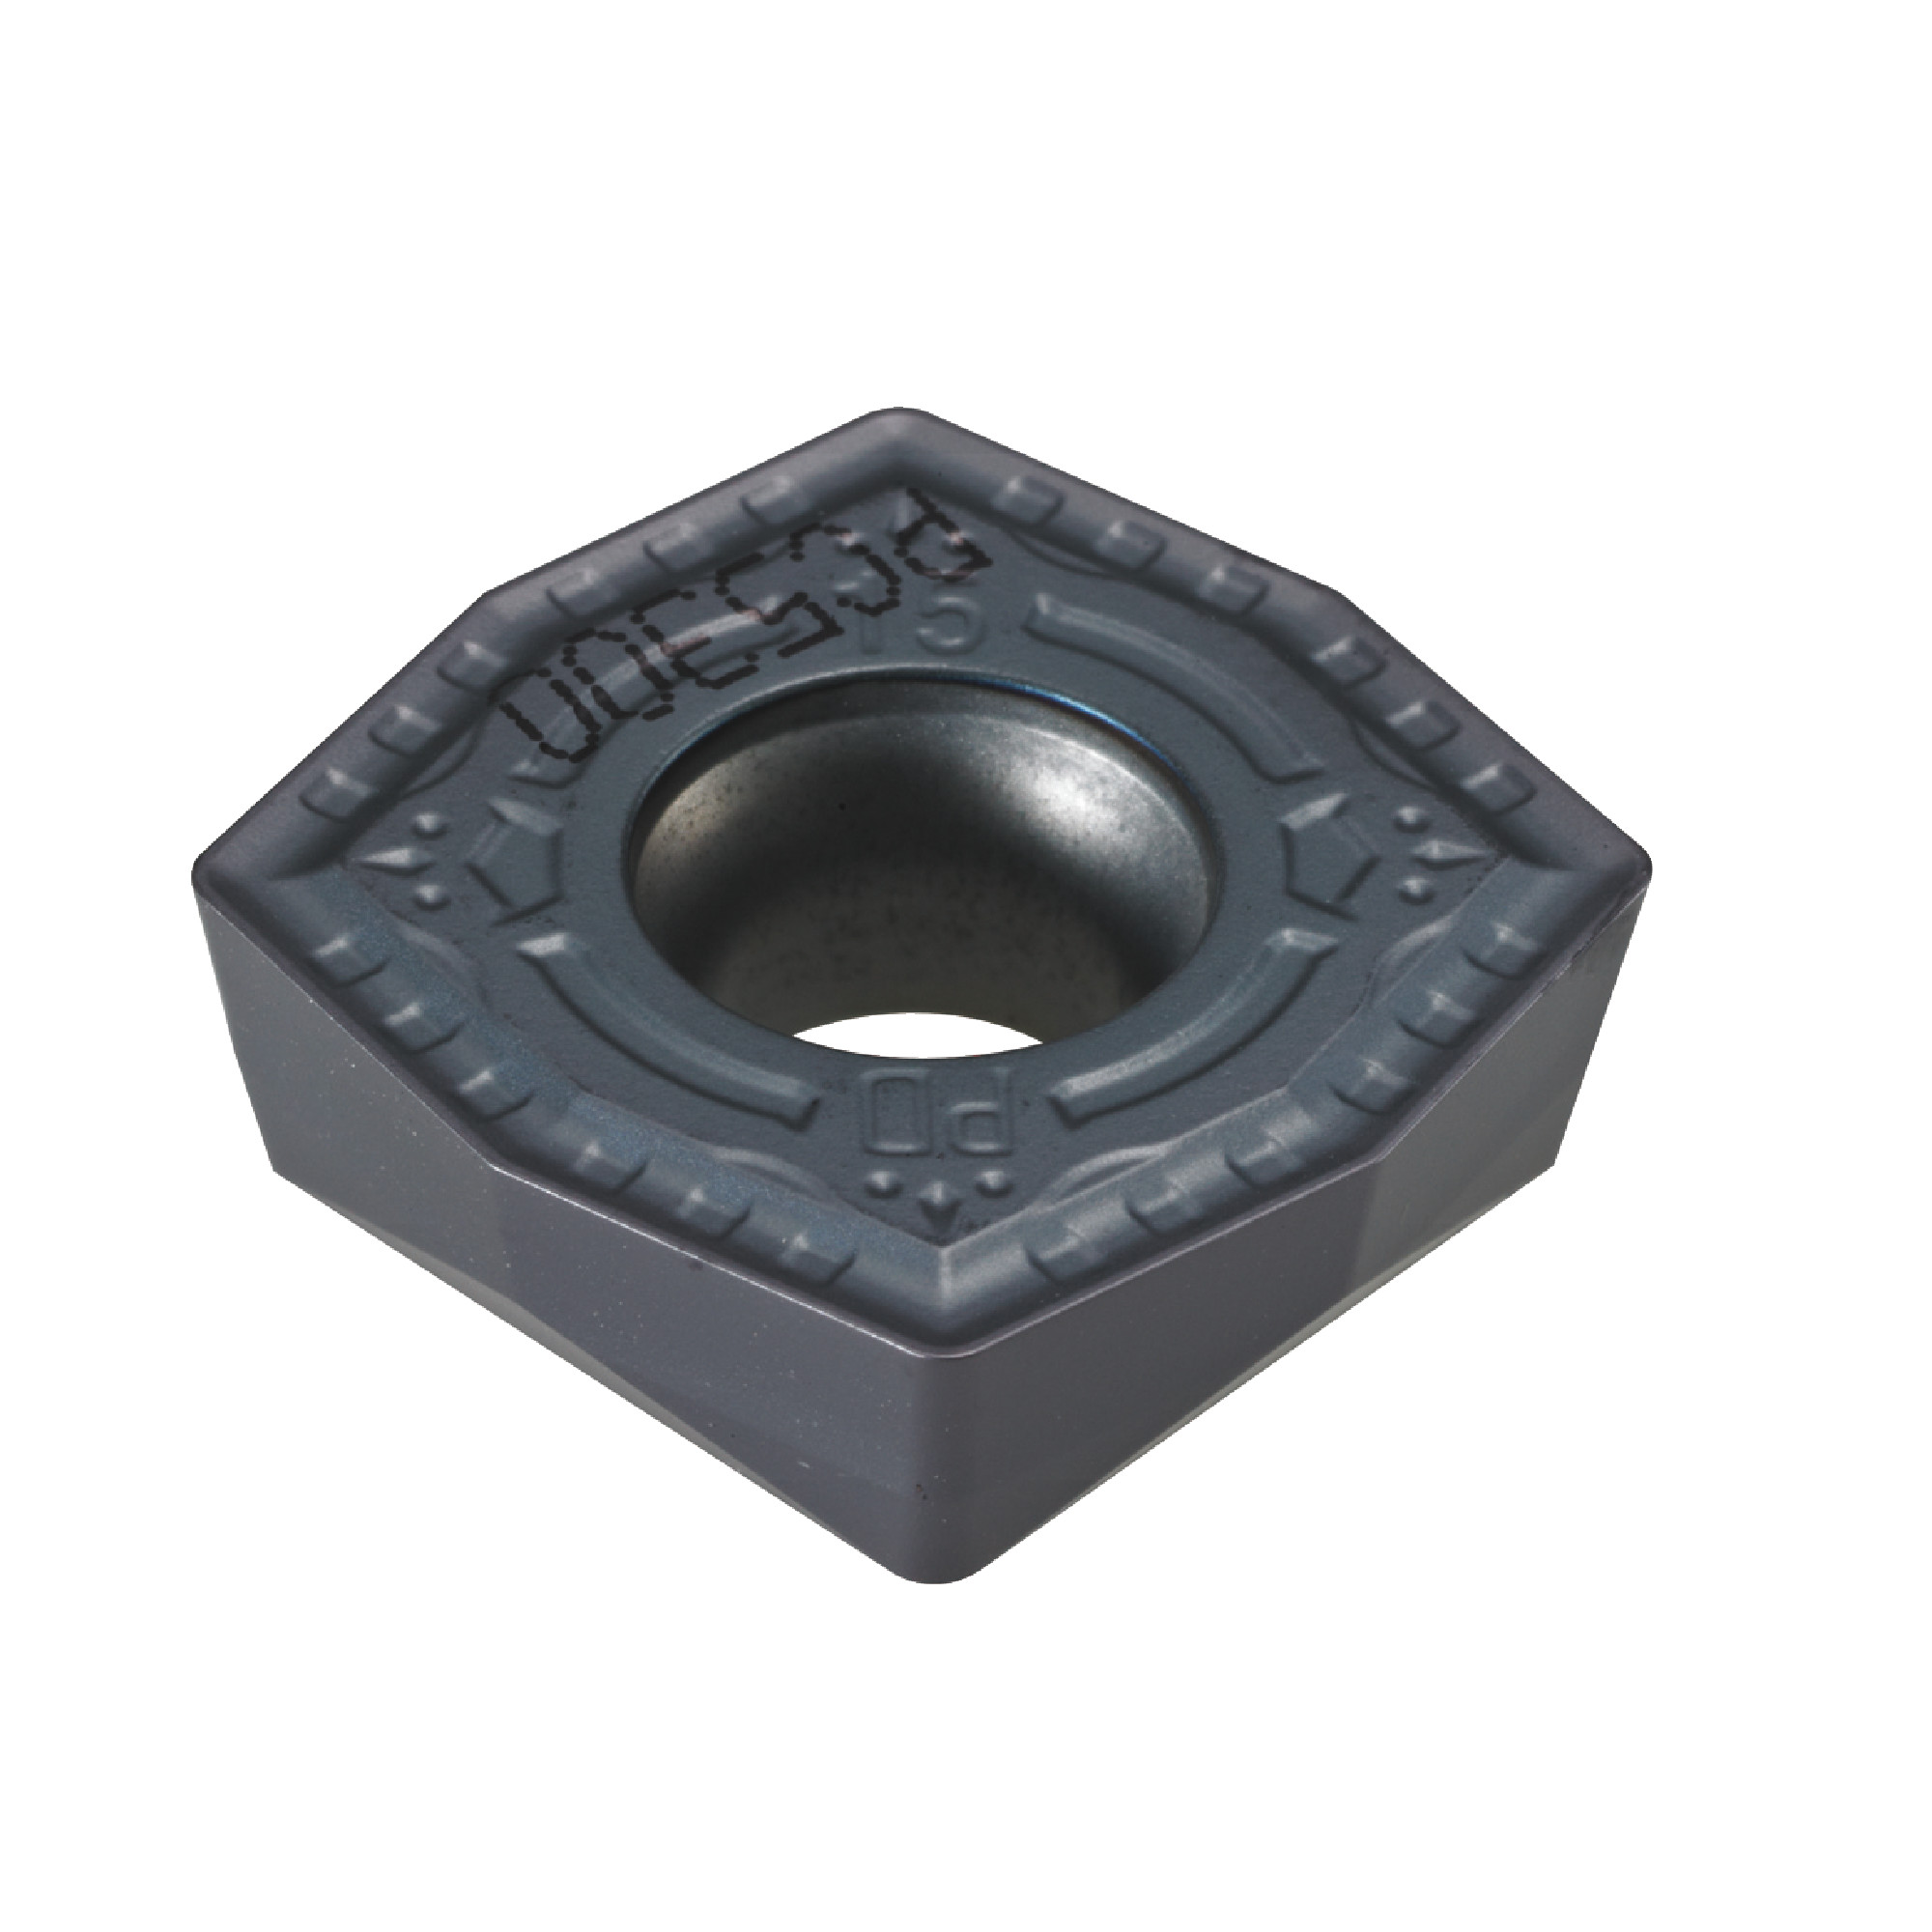 KORLOY - XOMT040204-PD PC5300 INDEXABLE DRILLING INSERT FOR KING DRILL SERIES